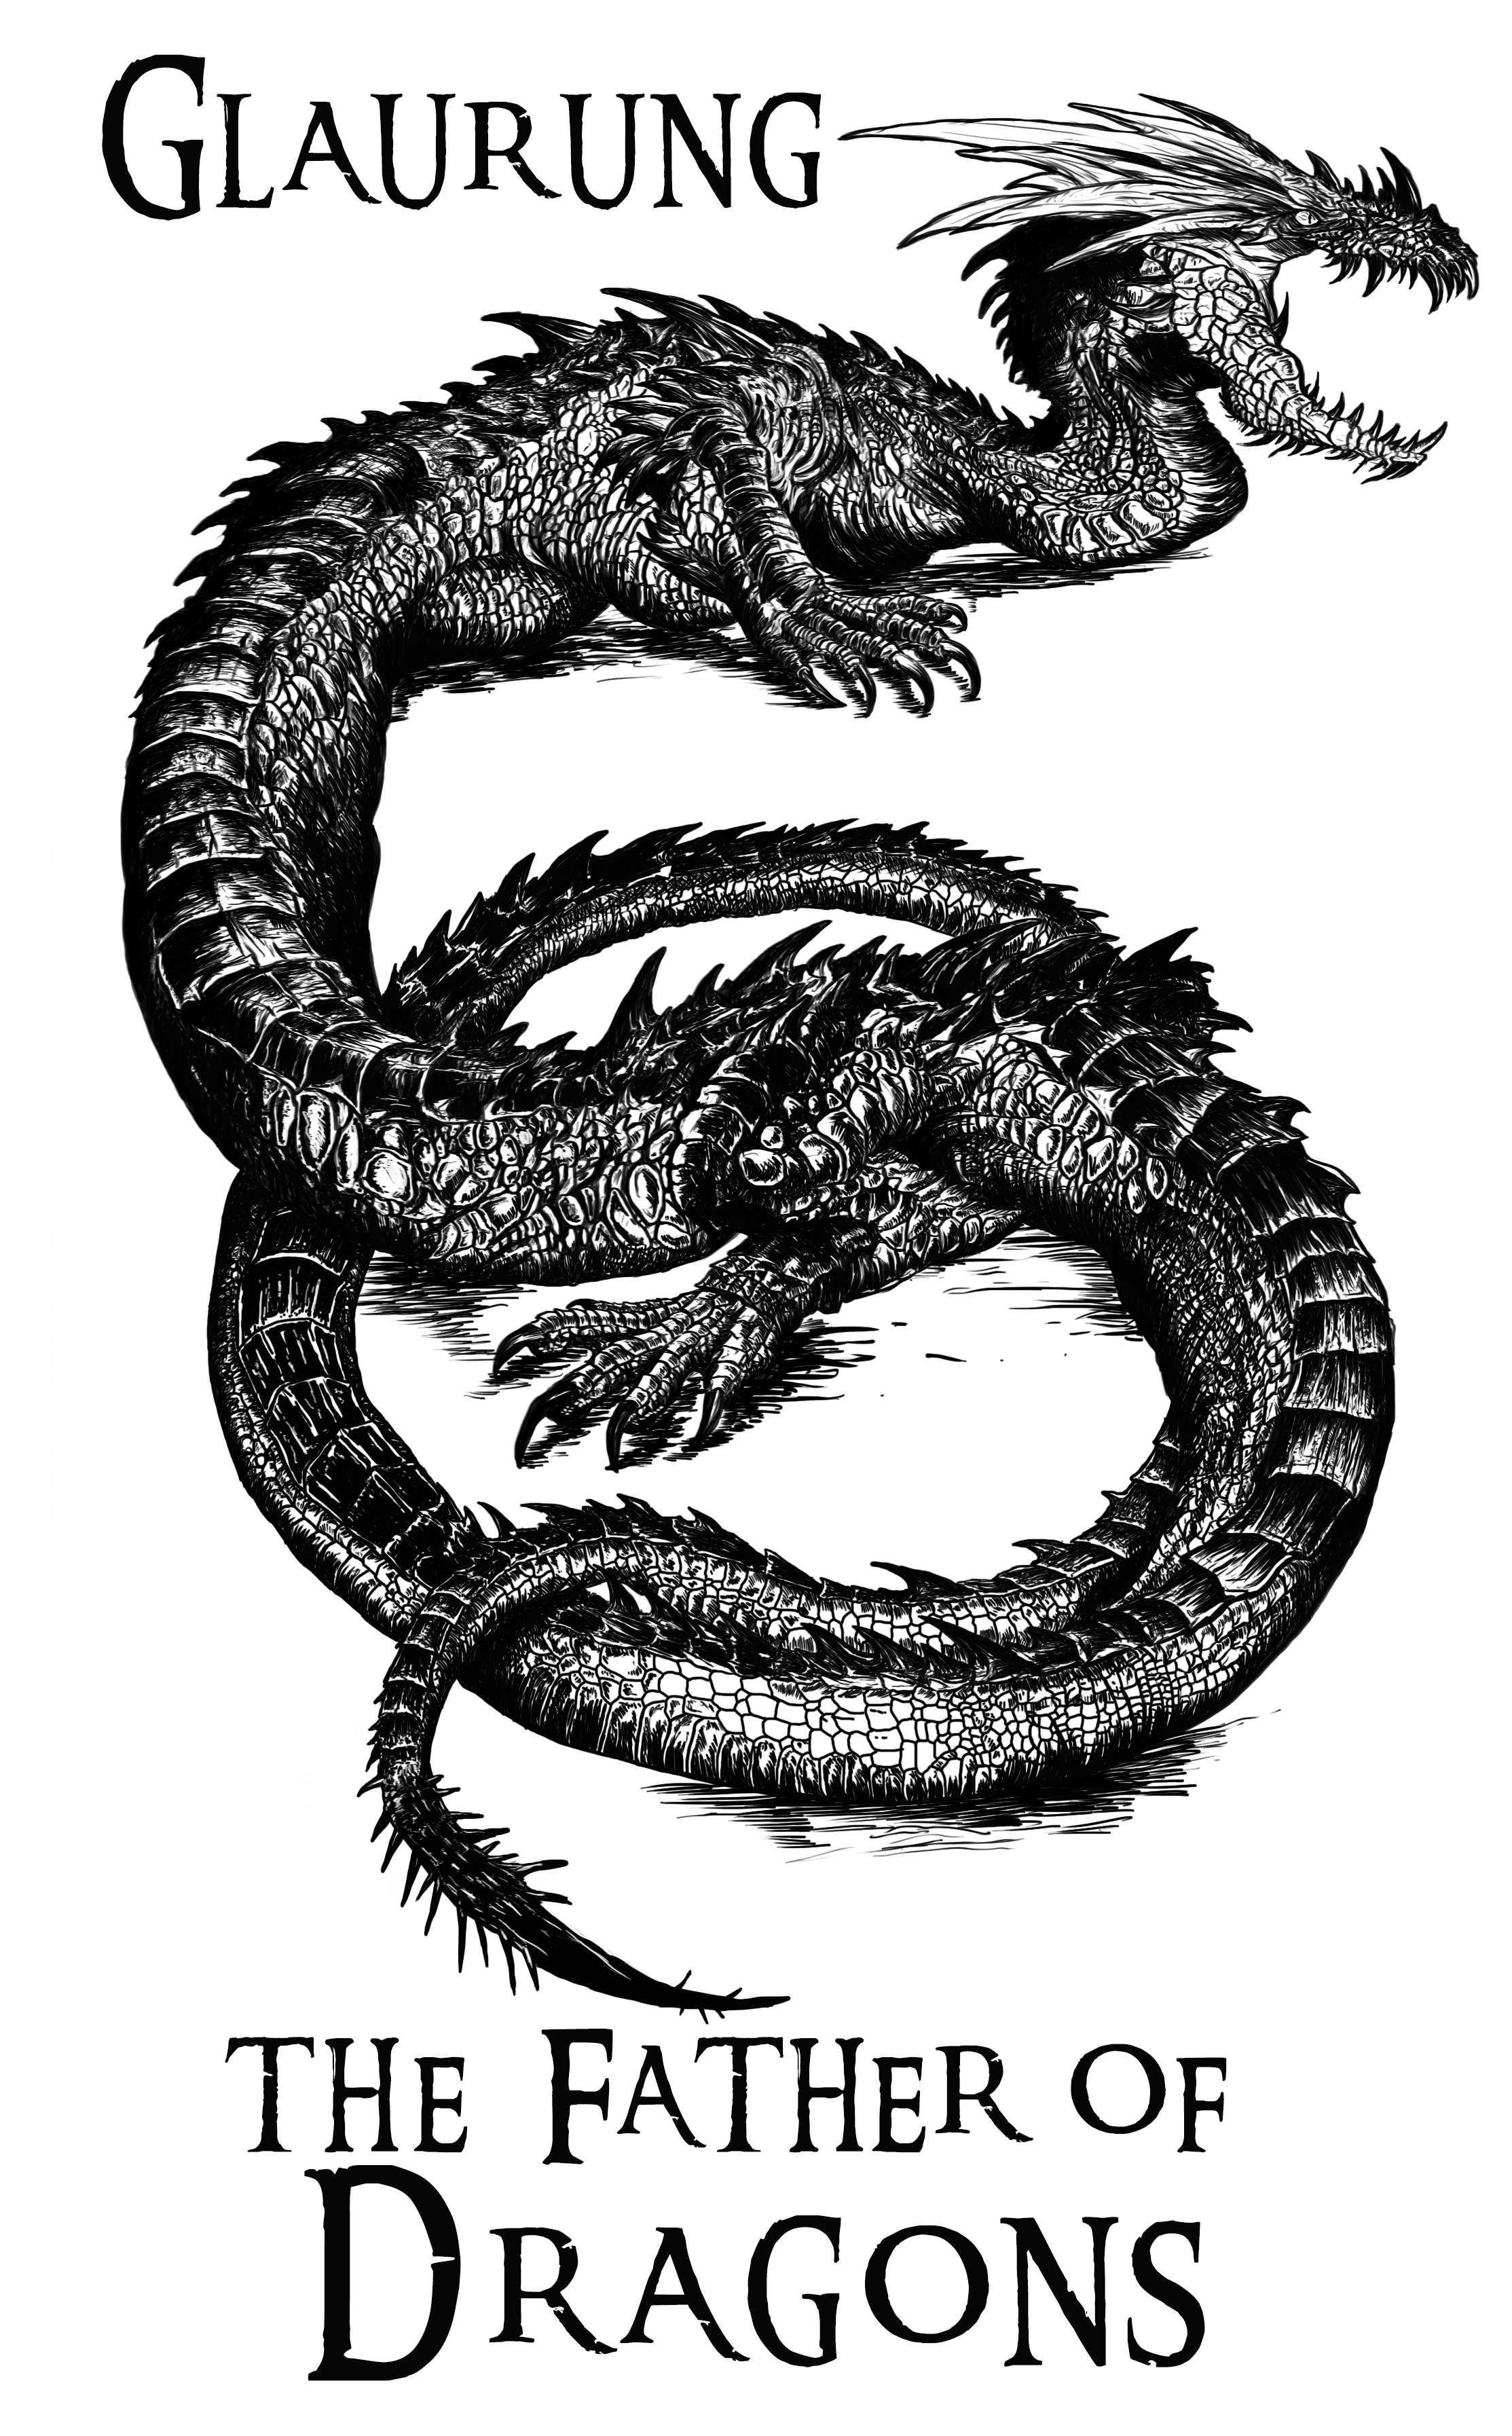 The Inklings: Glaurung -- The Father of Dragons